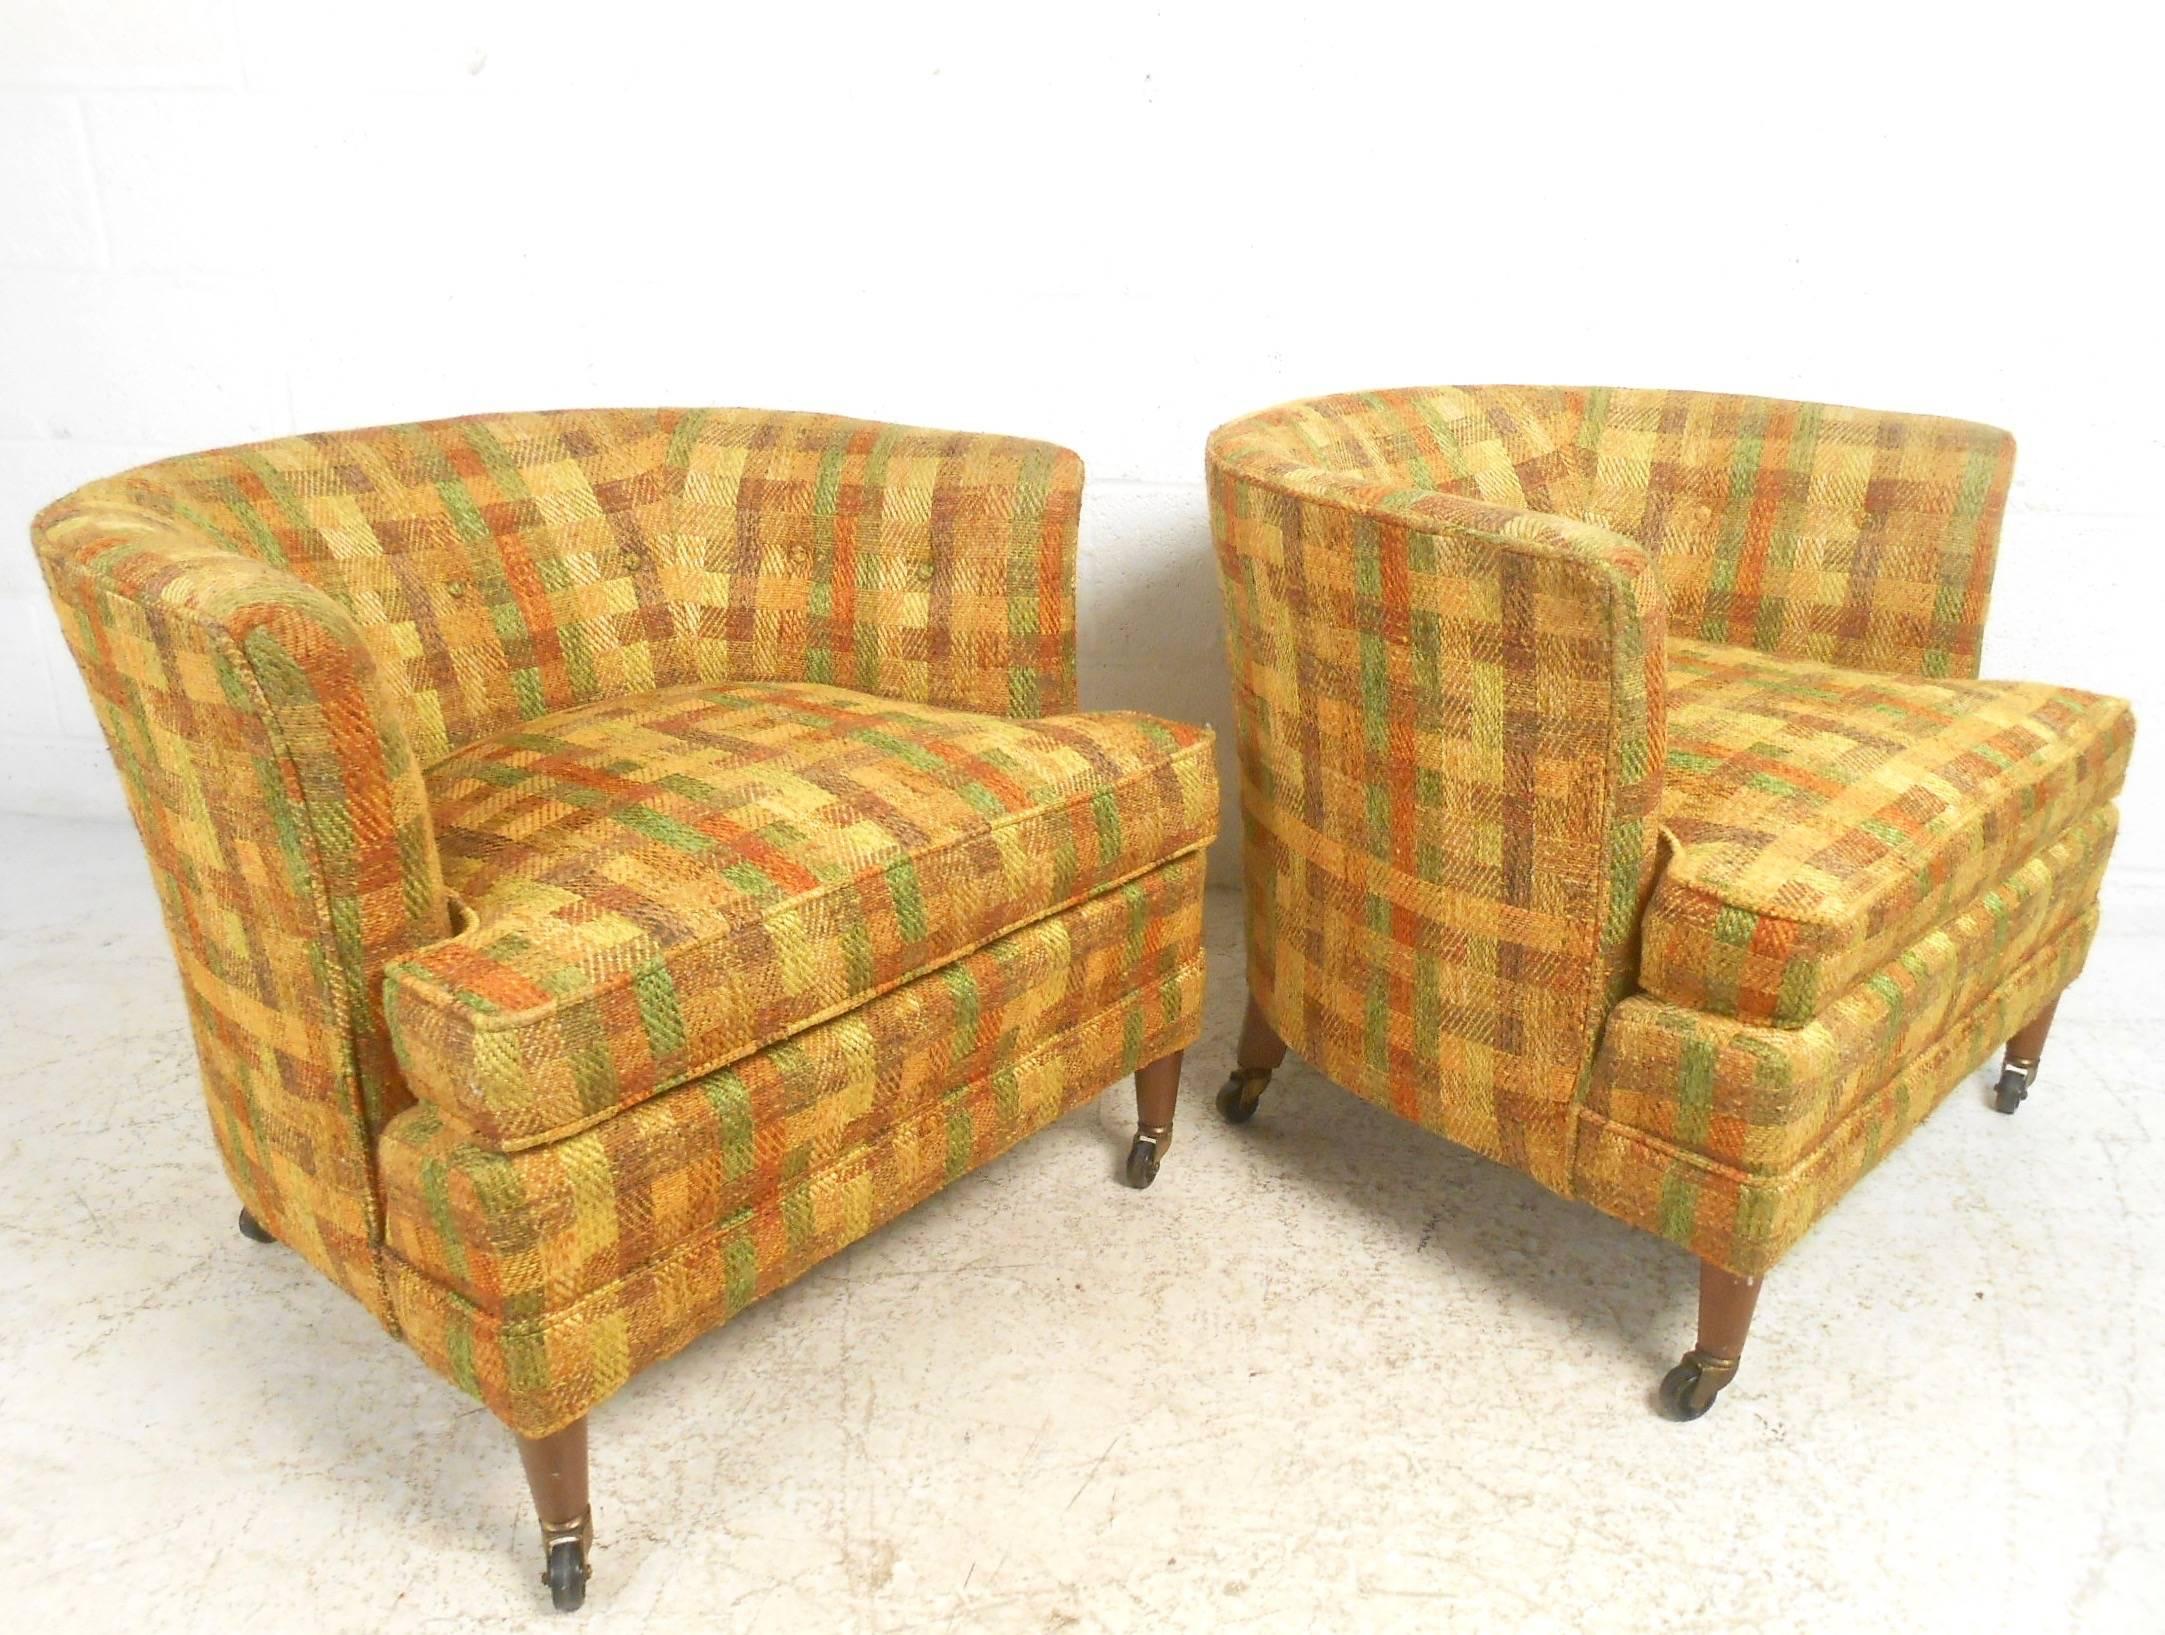 This stylish pair of retro modern club chairs features vintage plaid upholstery, barrel back seats, and walnut legs with casters for easy arrangement. This impressive mix of style and comfort makes this the perfect pair of Mid-Century Modern lounge